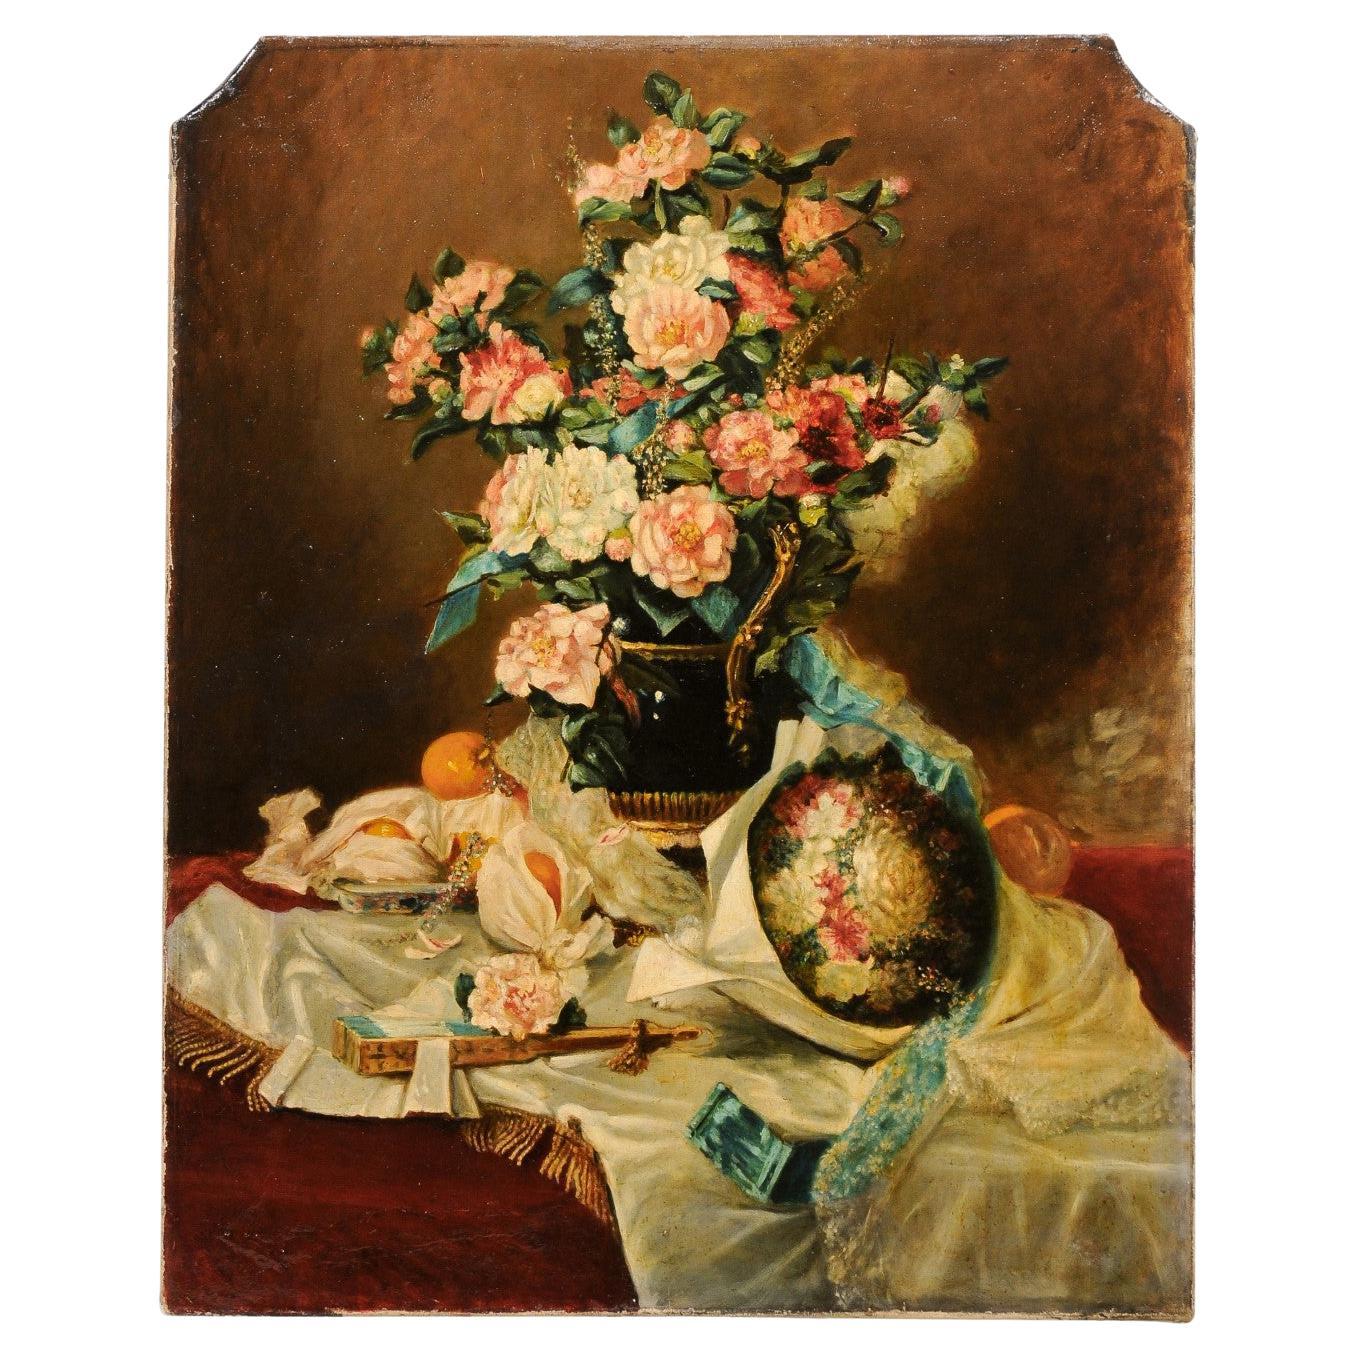 French 1790s Oil on Canvas Painting with Floral Bouquet, Fruits and Embroidery For Sale